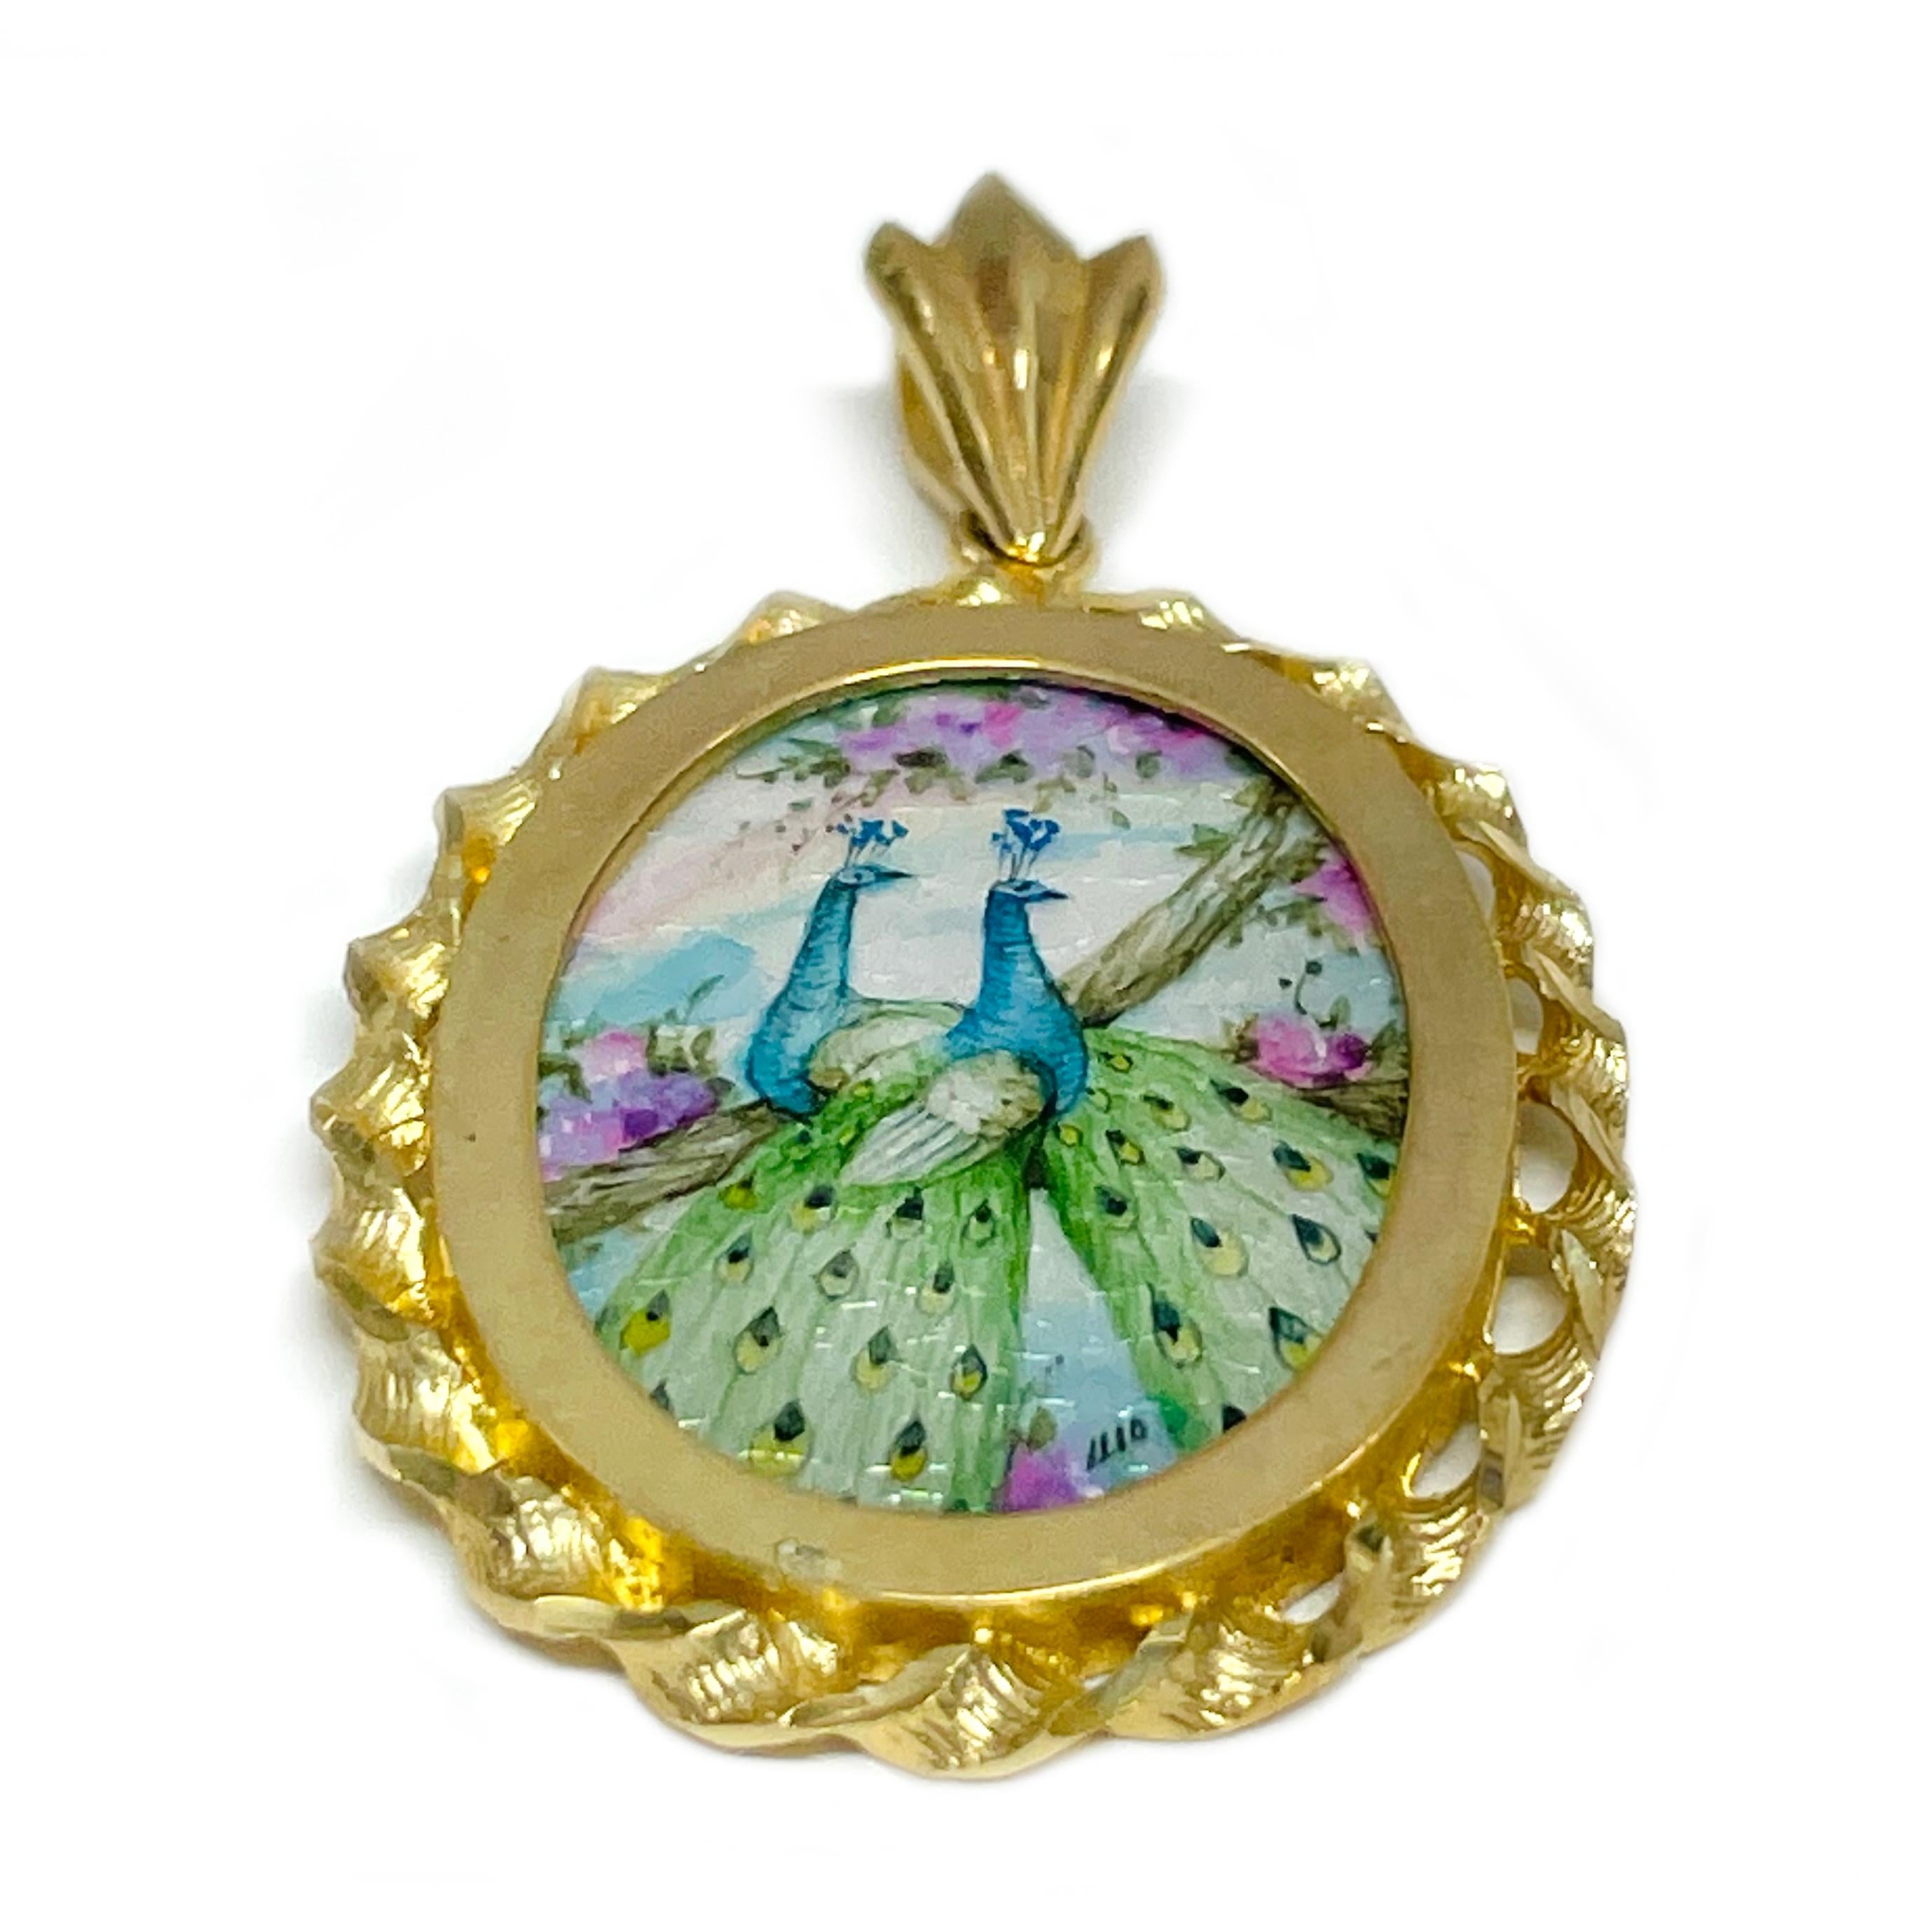 14 Karat Yellow Gold Peacocks Hand Painted on a Mother of Pearl Pendant. The miniature painting is set in a 14 karat gold twisted rope oval frame with diamond-cut details. The painting is signed by the master artist, Luo-Afi-Ping and includes a